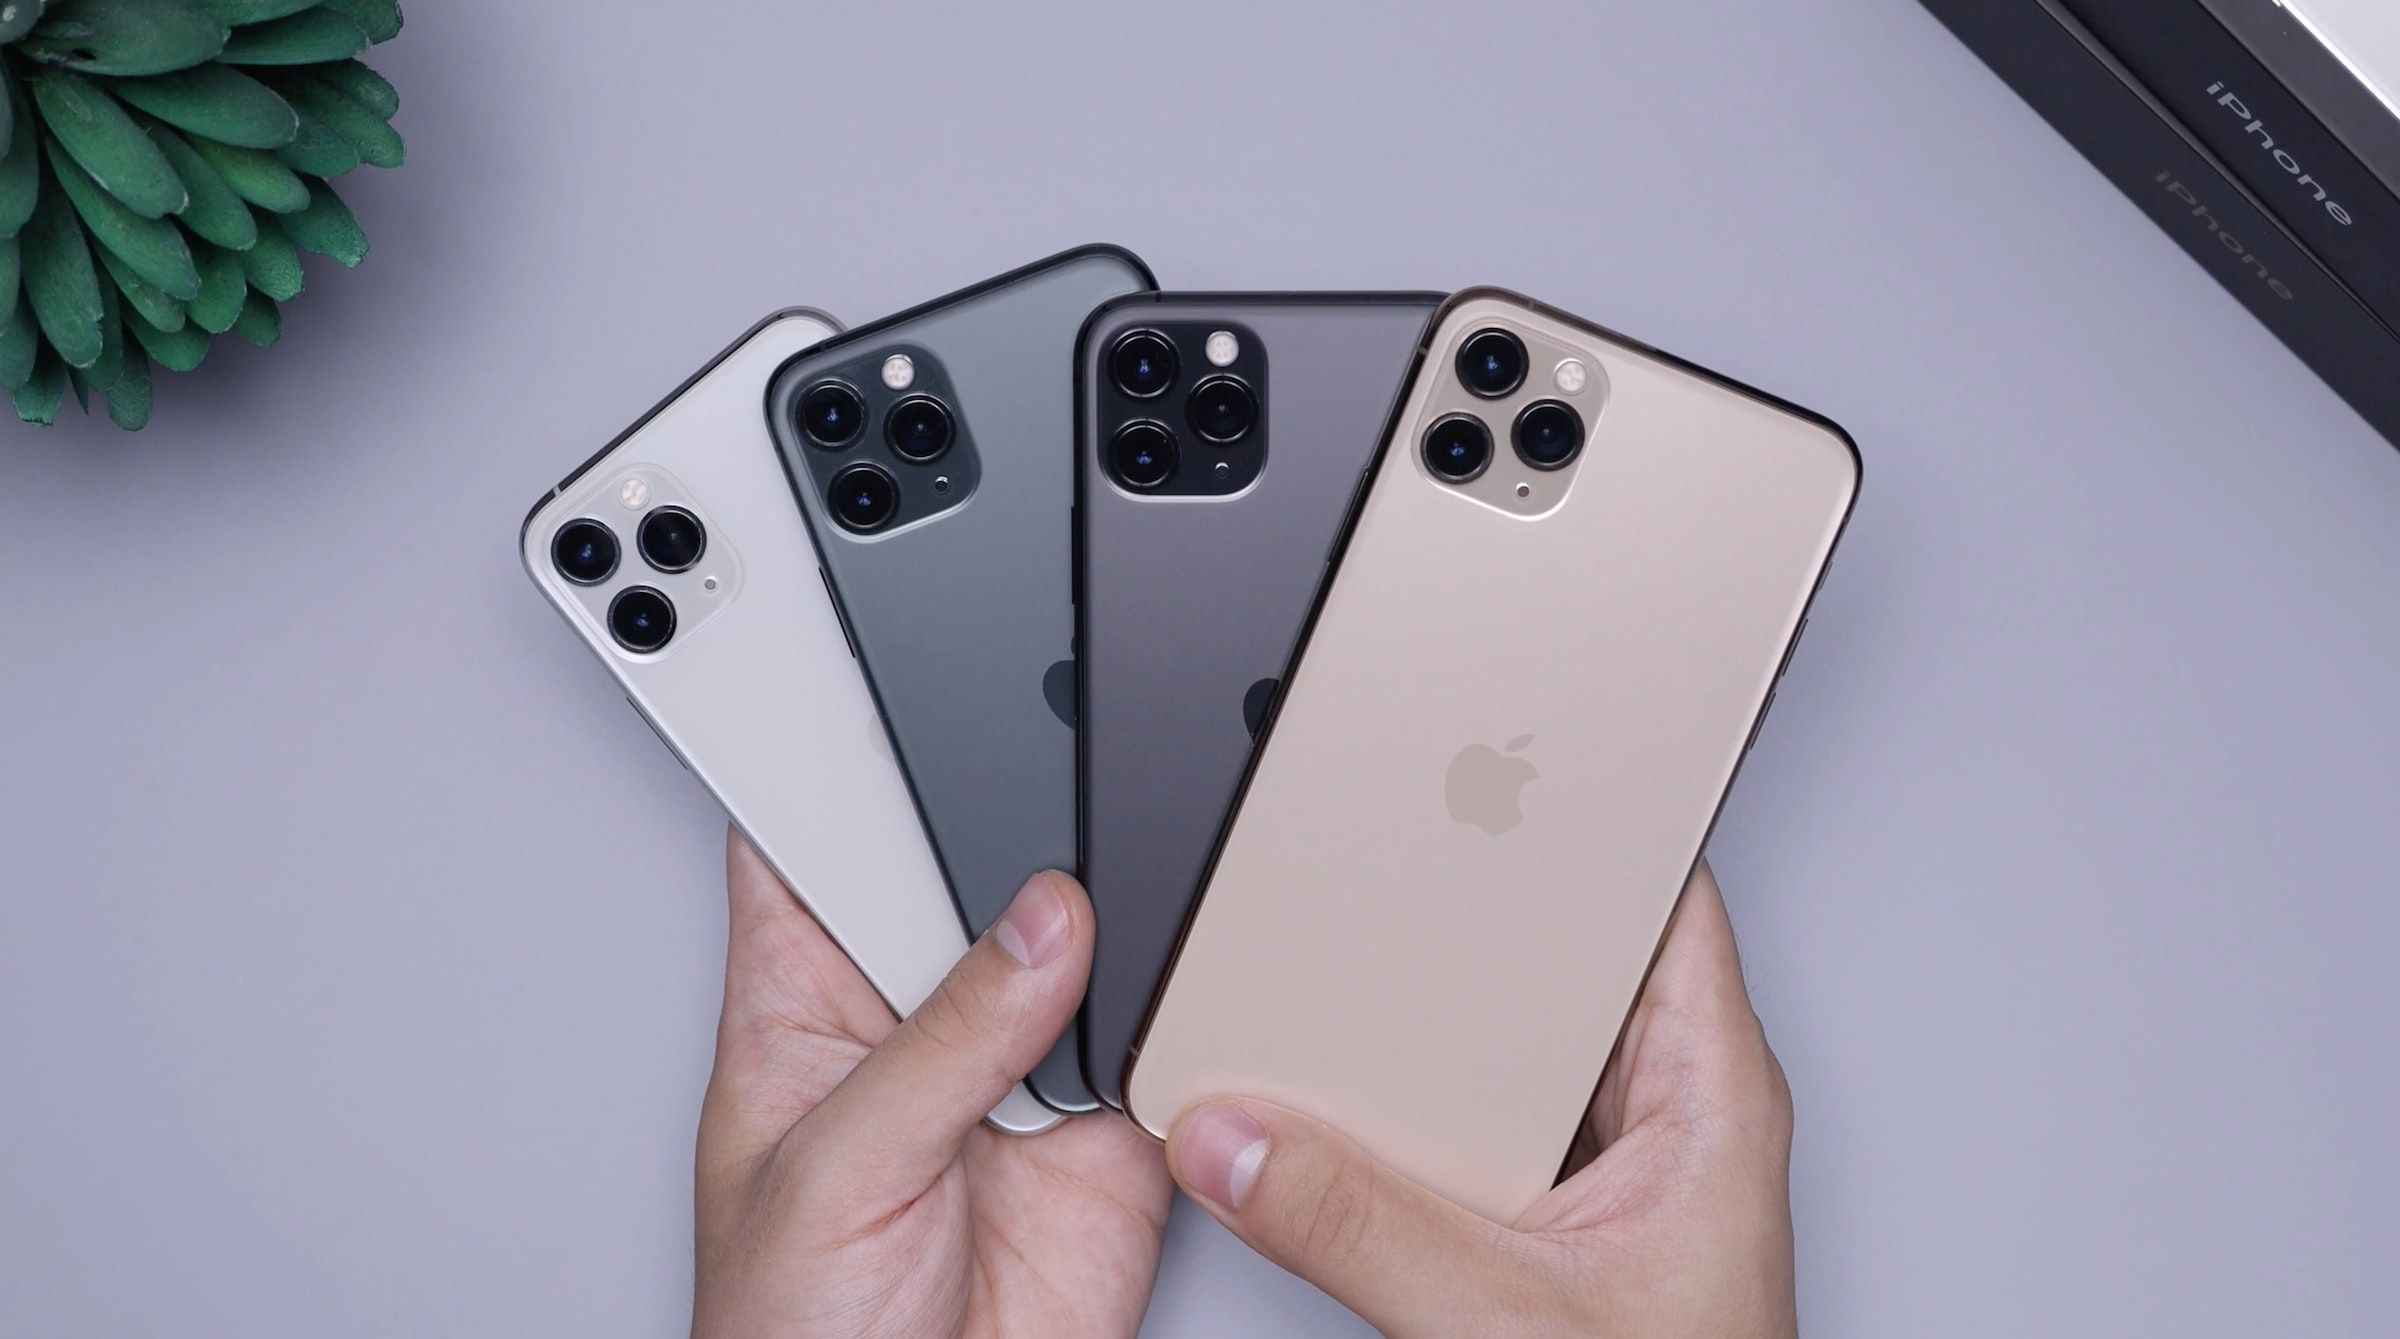 Different iPhone models